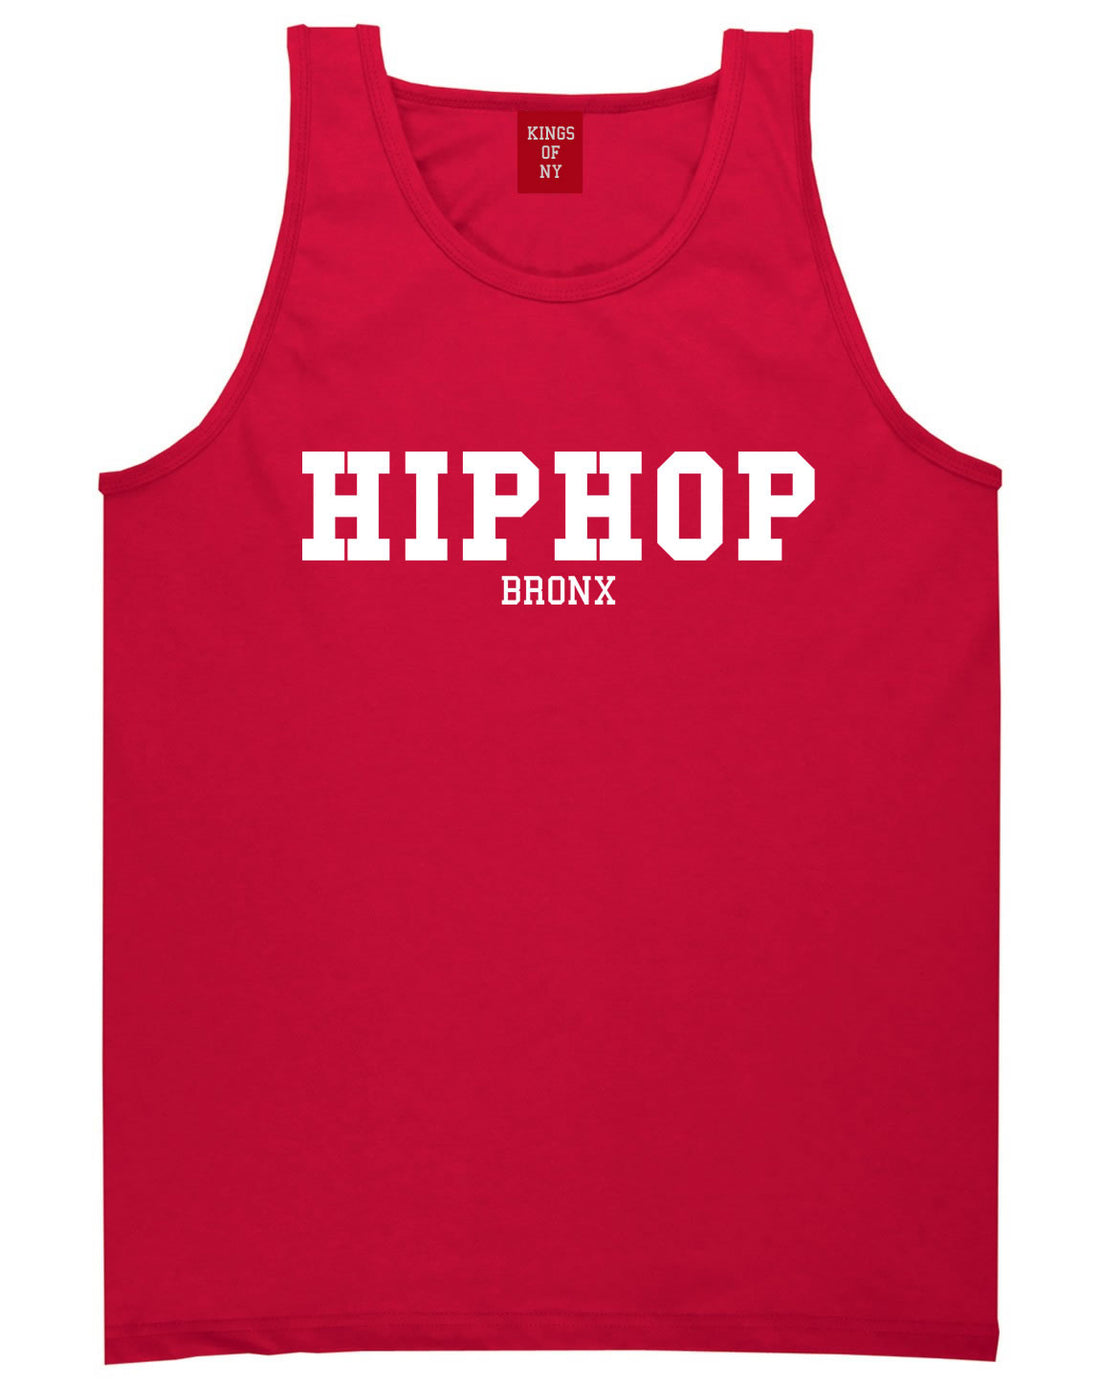 Hiphop the Bronx Tank Top in Red by Kings Of NY